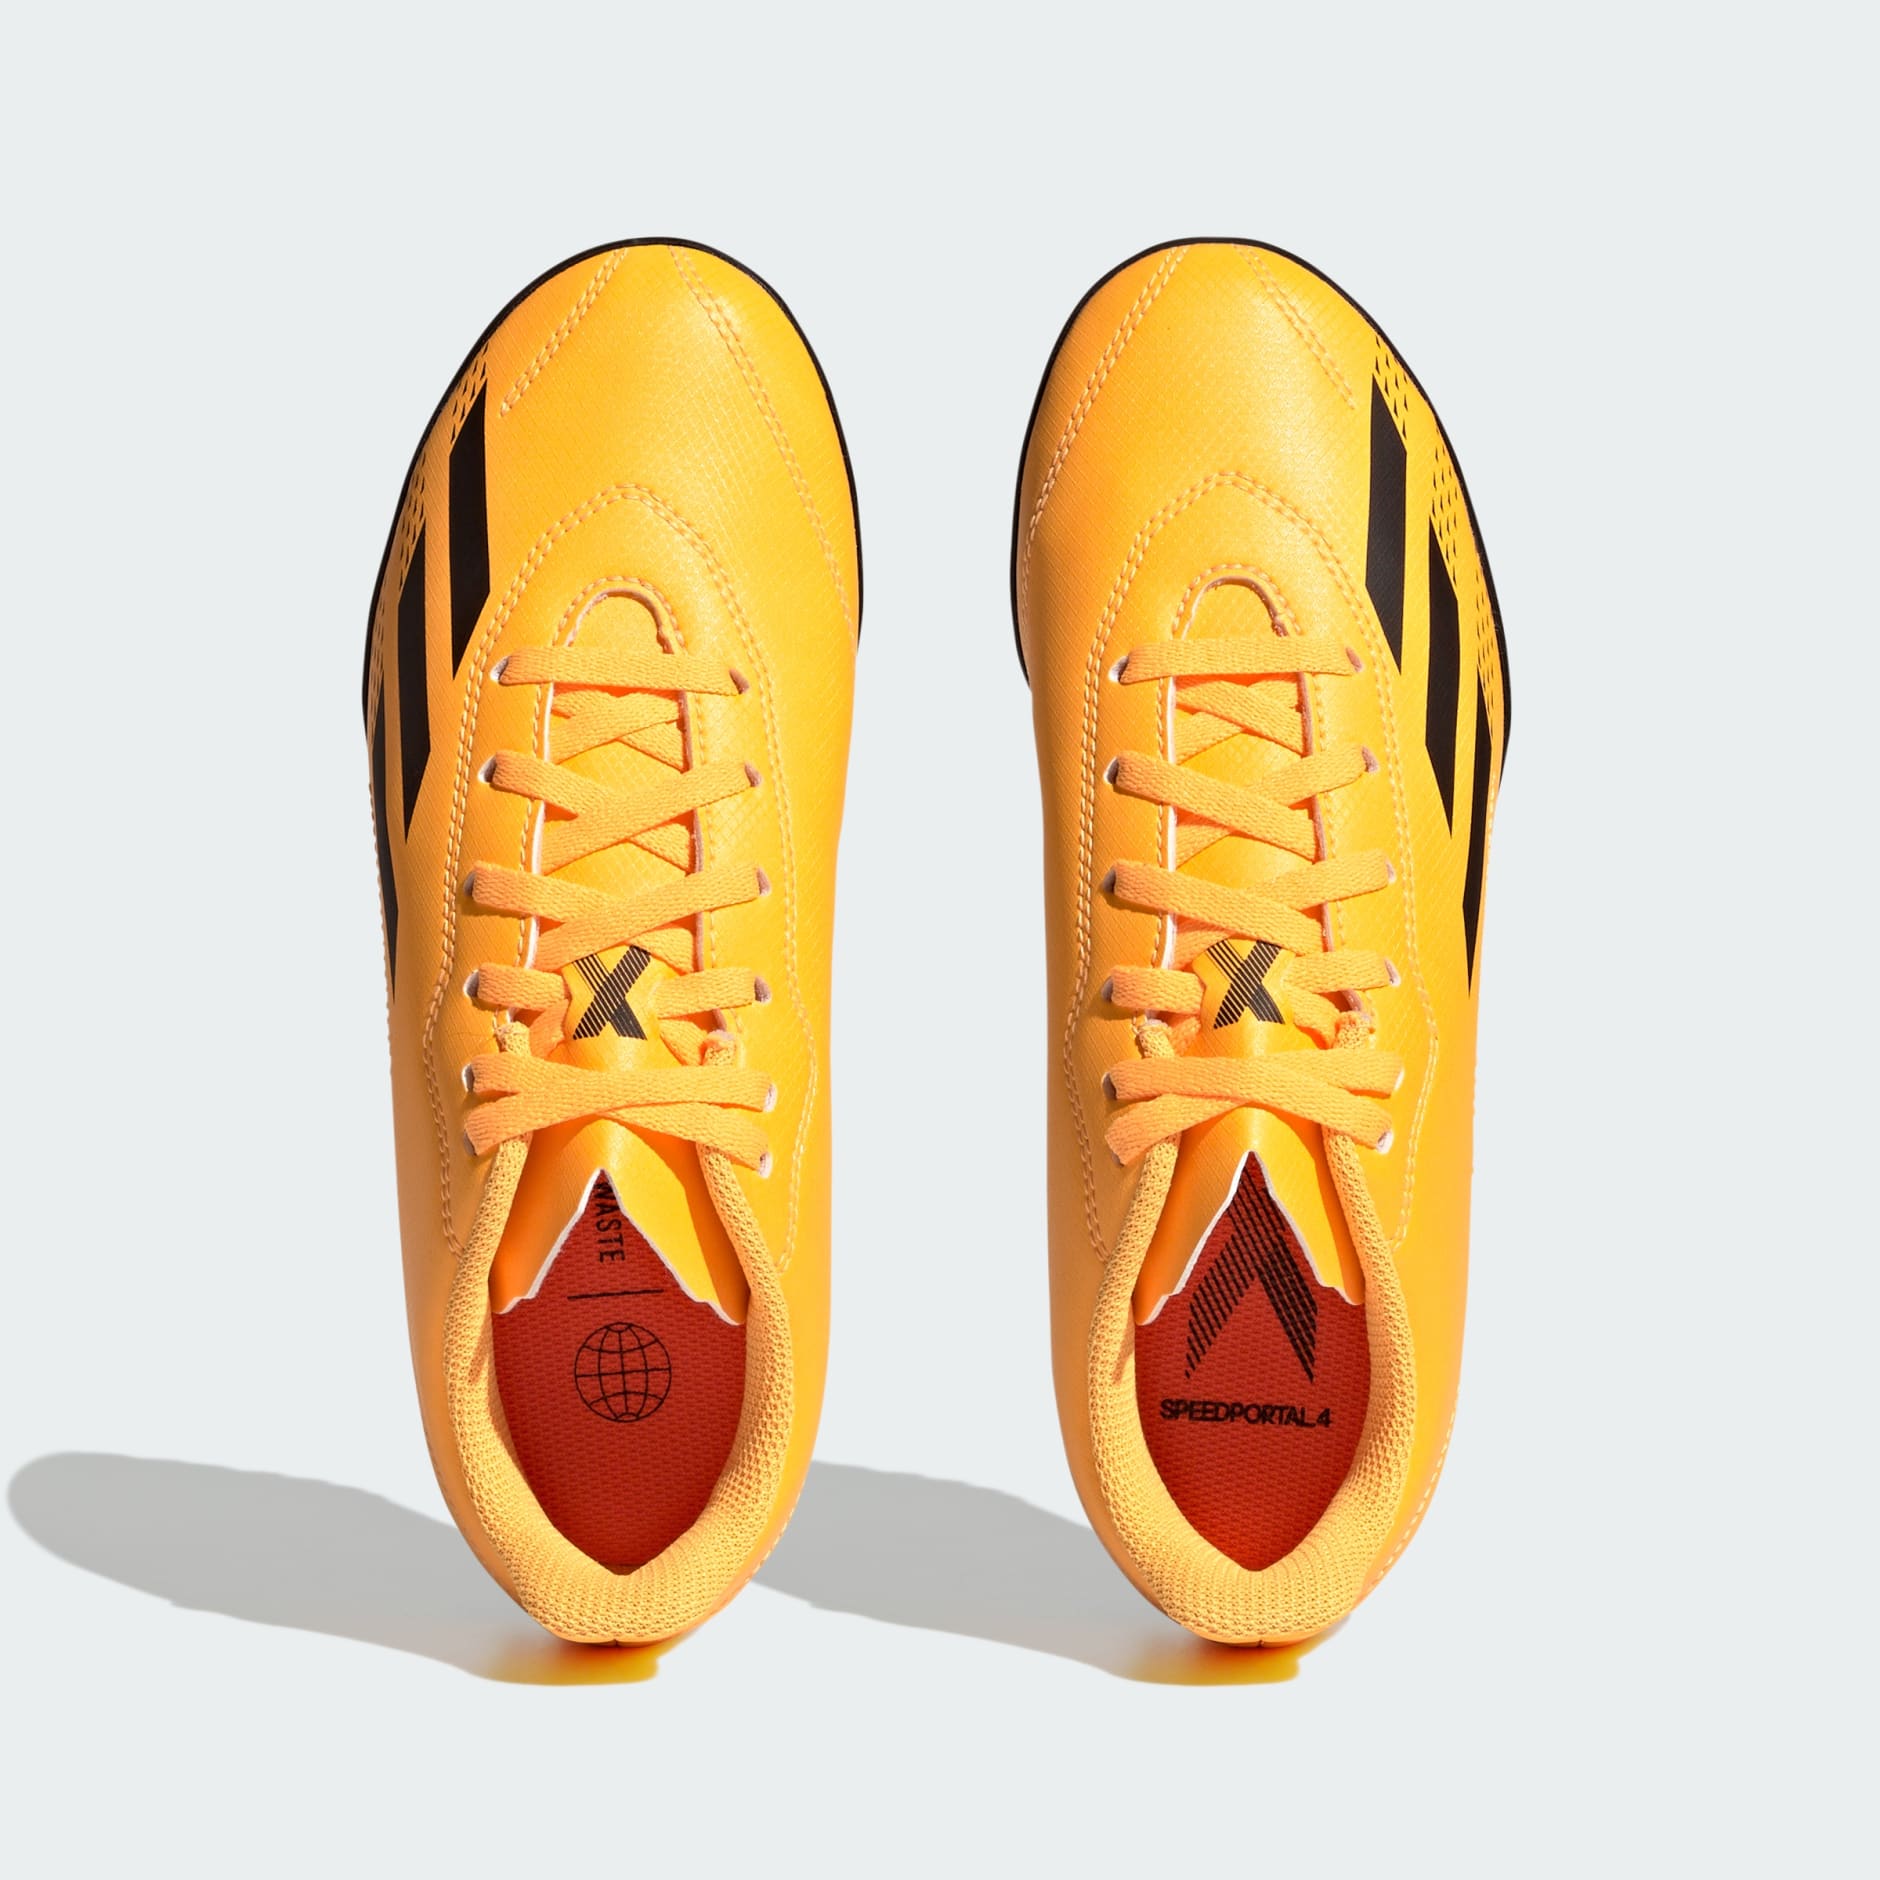 Shoes - X Speedportal.4 Turf Boots - Gold | adidas South Africa